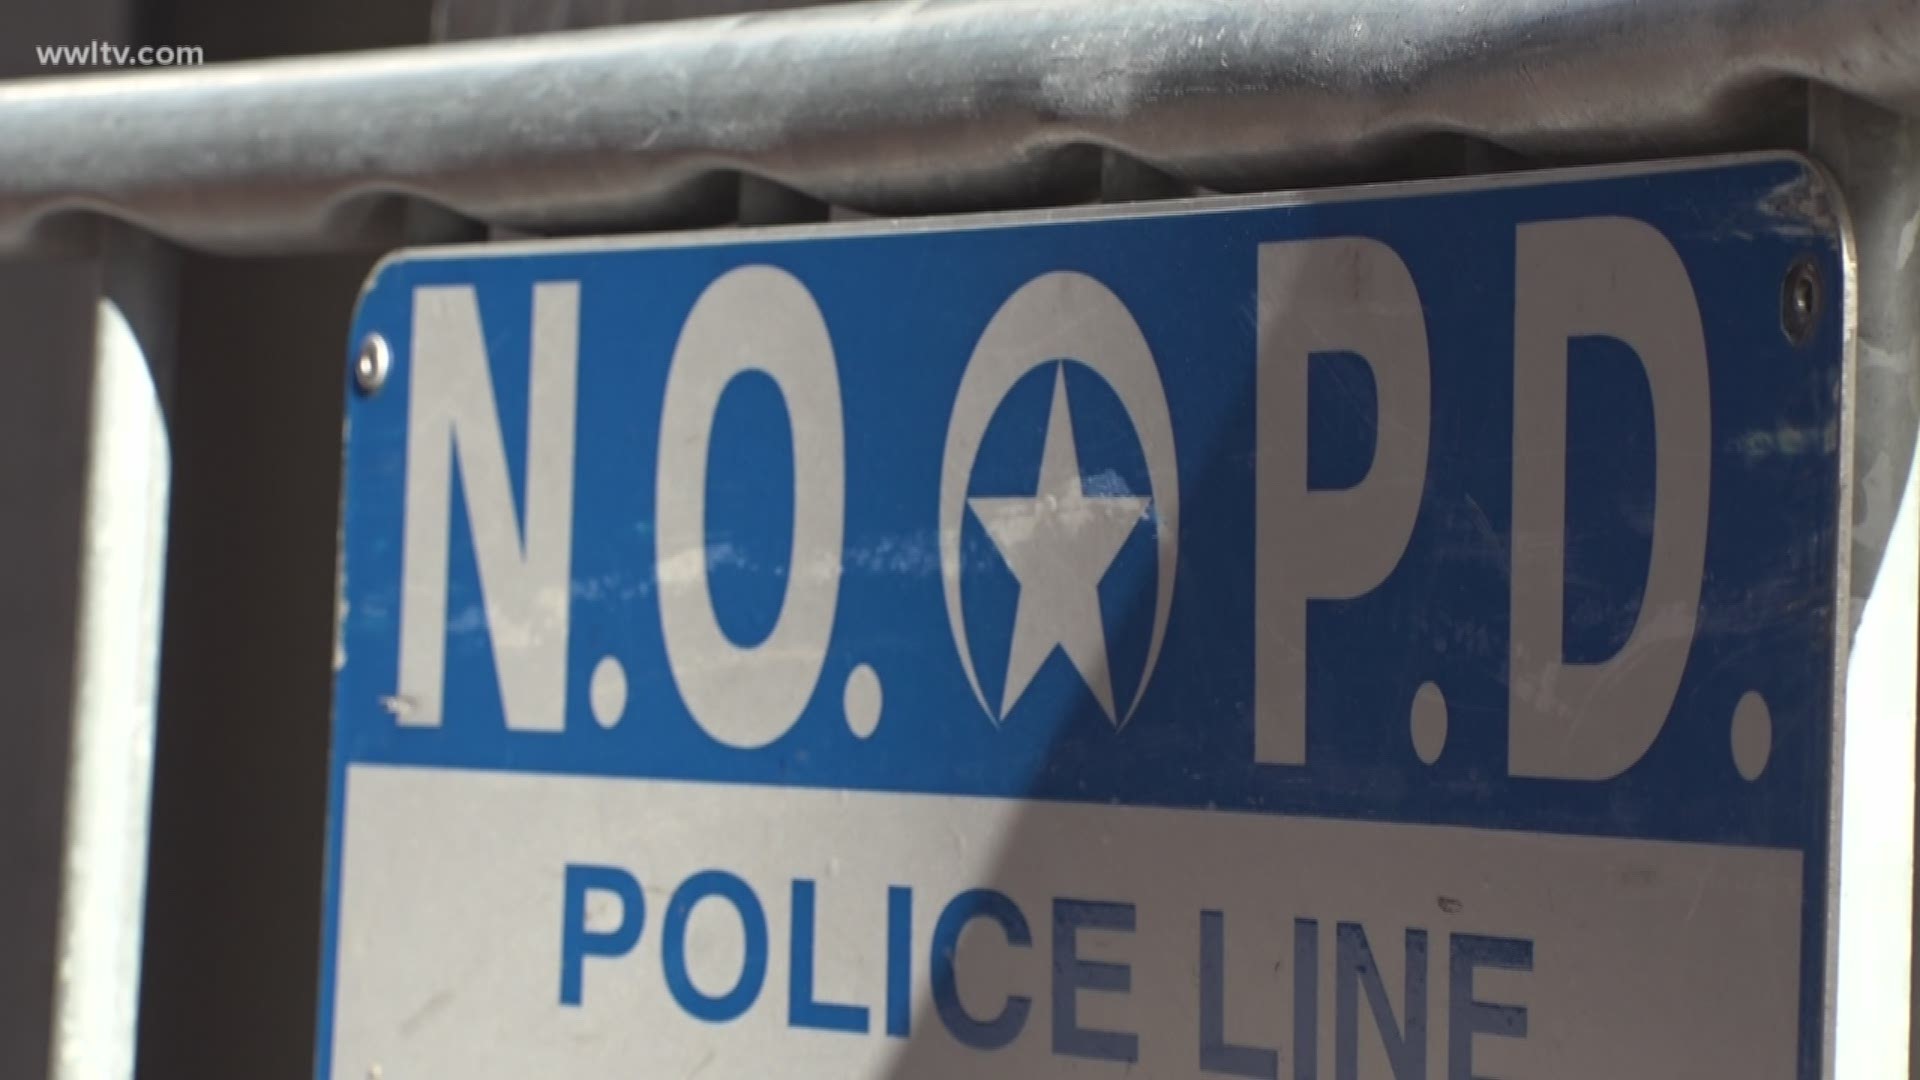 NOPD was able to deescalate the situation.